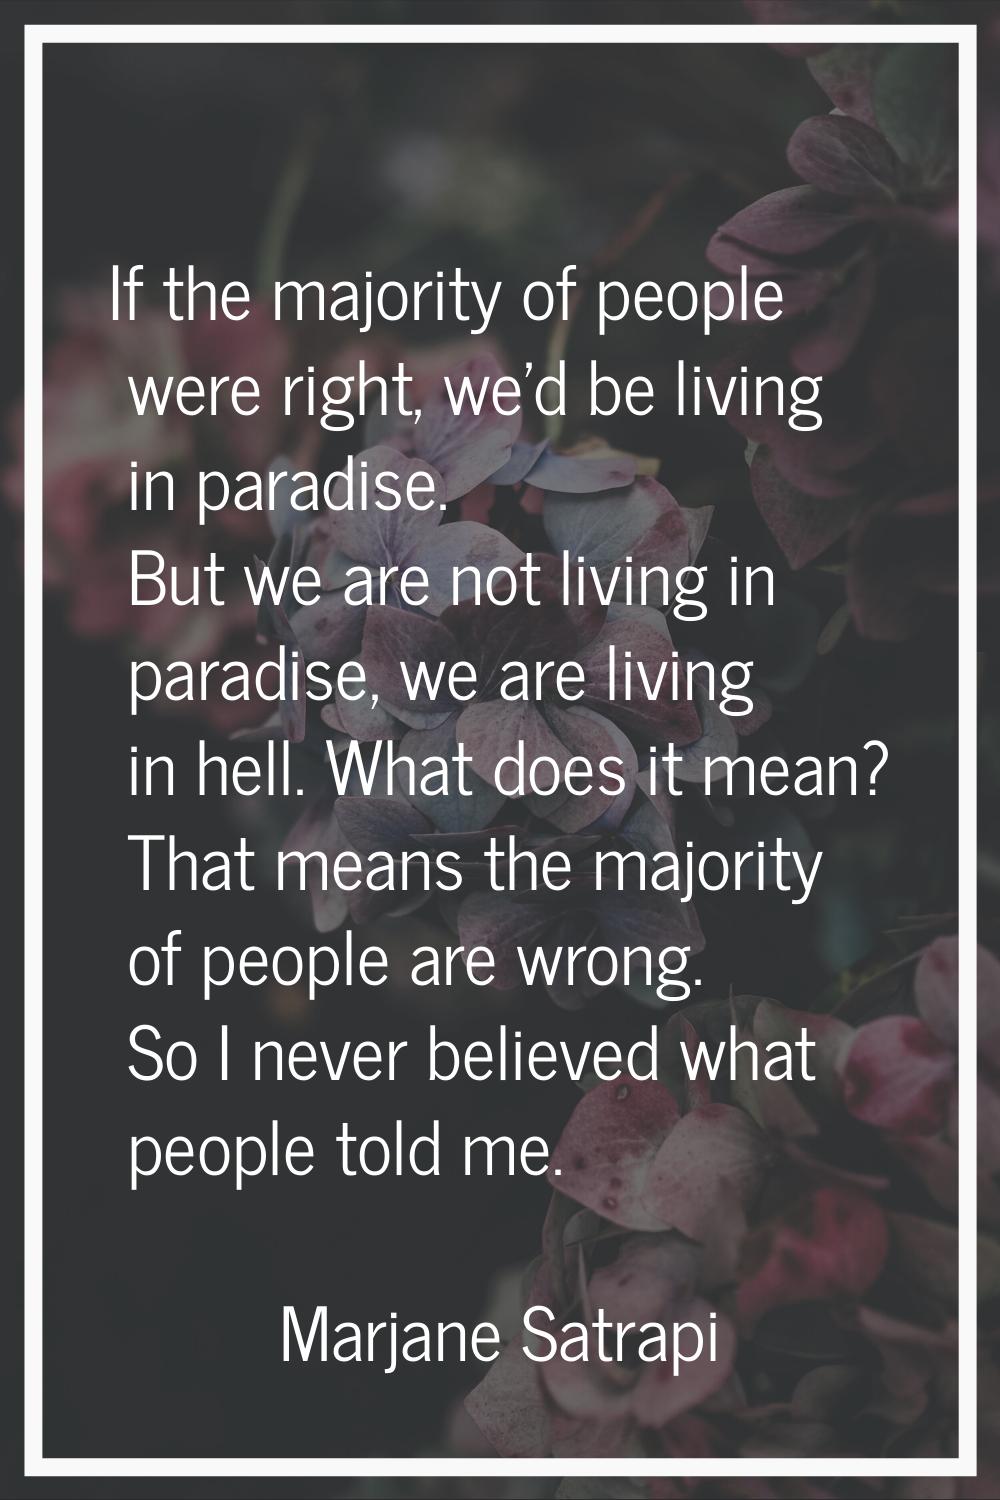 If the majority of people were right, we'd be living in paradise. But we are not living in paradise